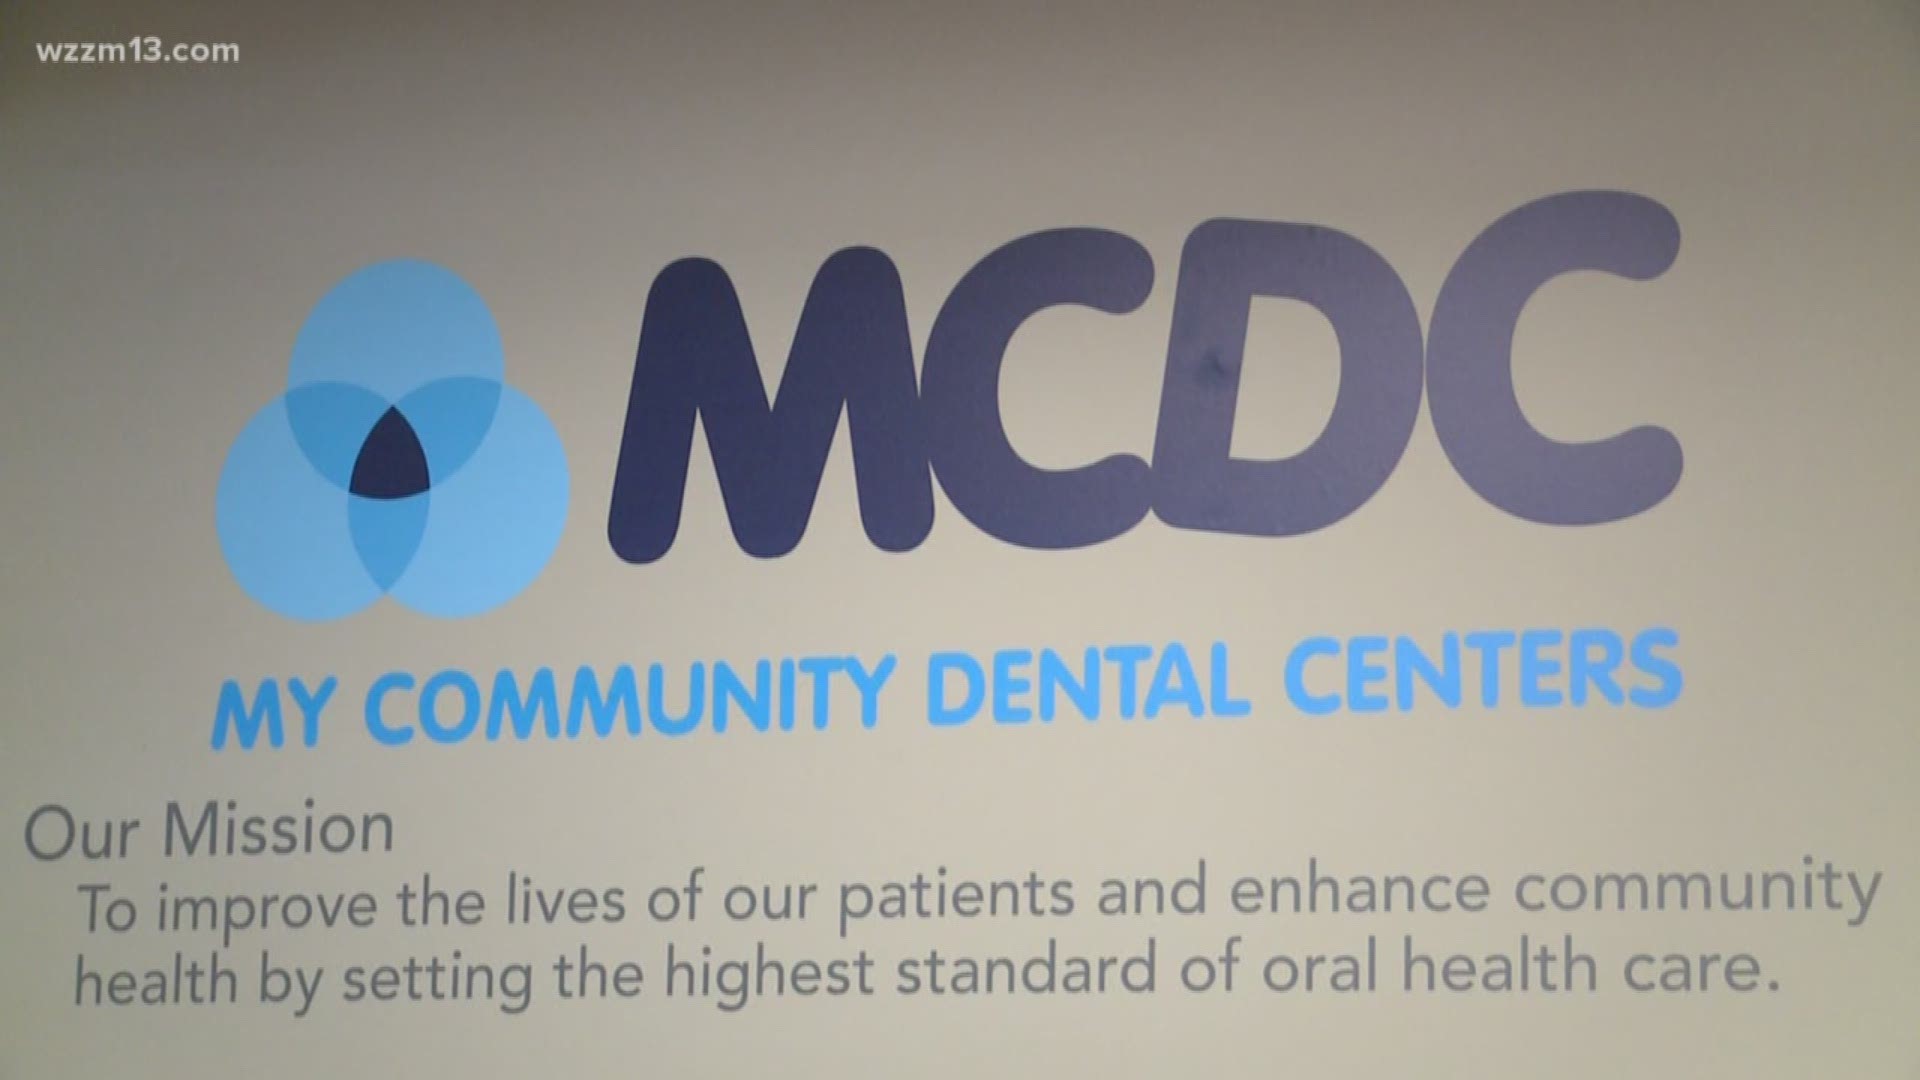 My Community Dental Centers is a non-profit dedicated to providing dental services to Medicaid enrollees, low-income, uninsured and those with private insurance seeking a dental home.